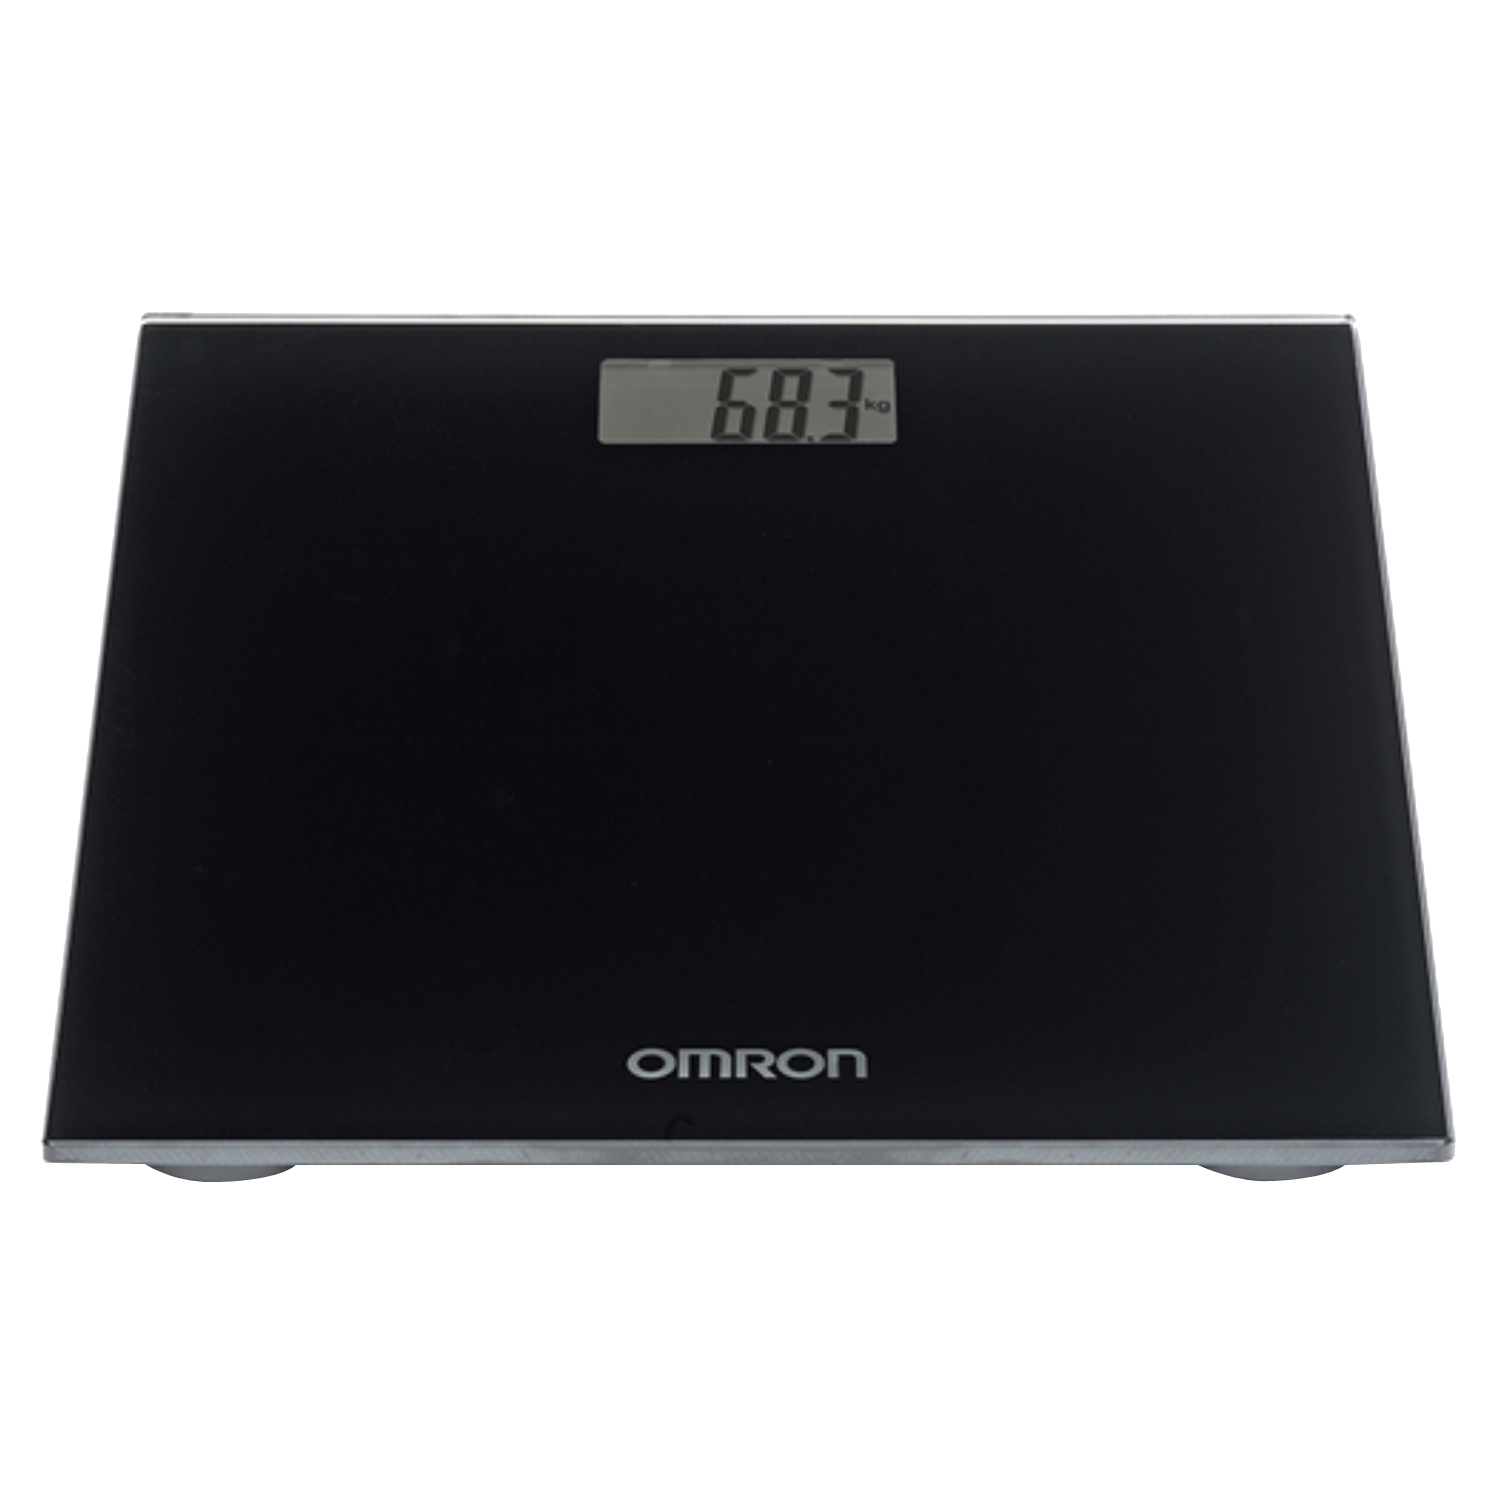 Back Image for Omron Digital Personal Scale HN289